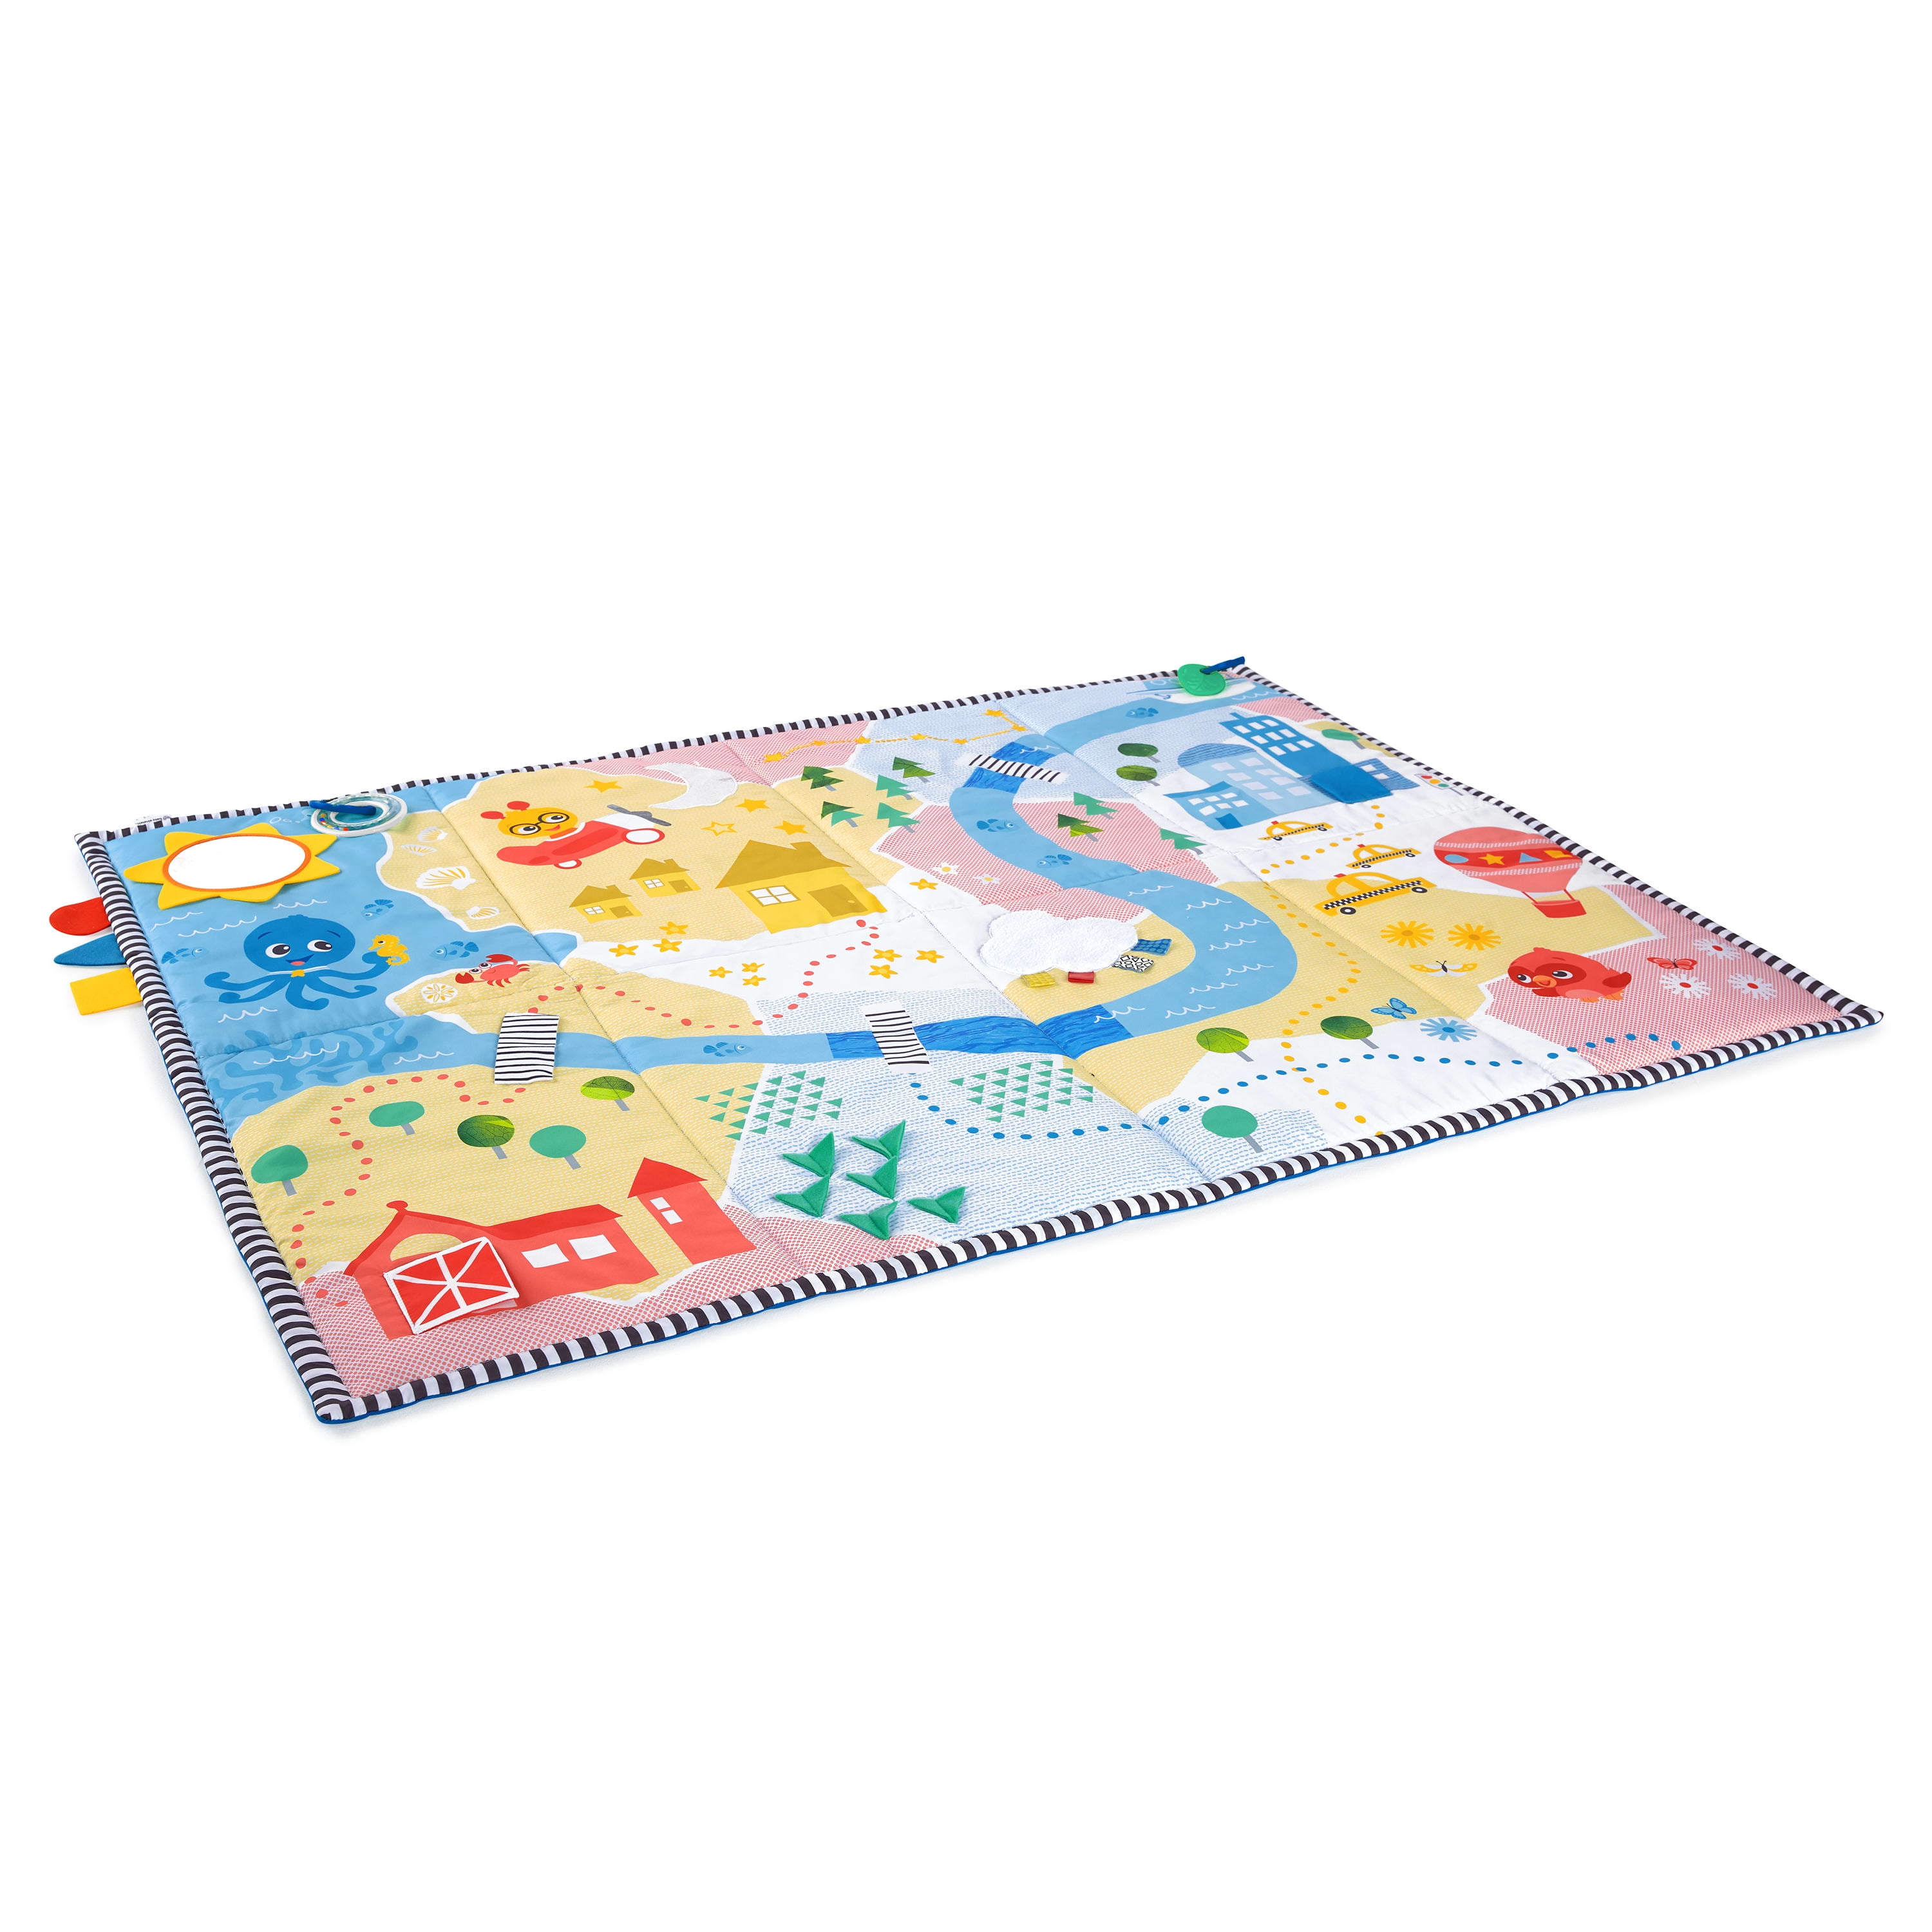 Baby Einstein Sea & City Sensory Playscape Tummy Time Activity Mat w/ 3 Detachable Toys $16.47 + Free S&H w/ Walmart+ or $35+